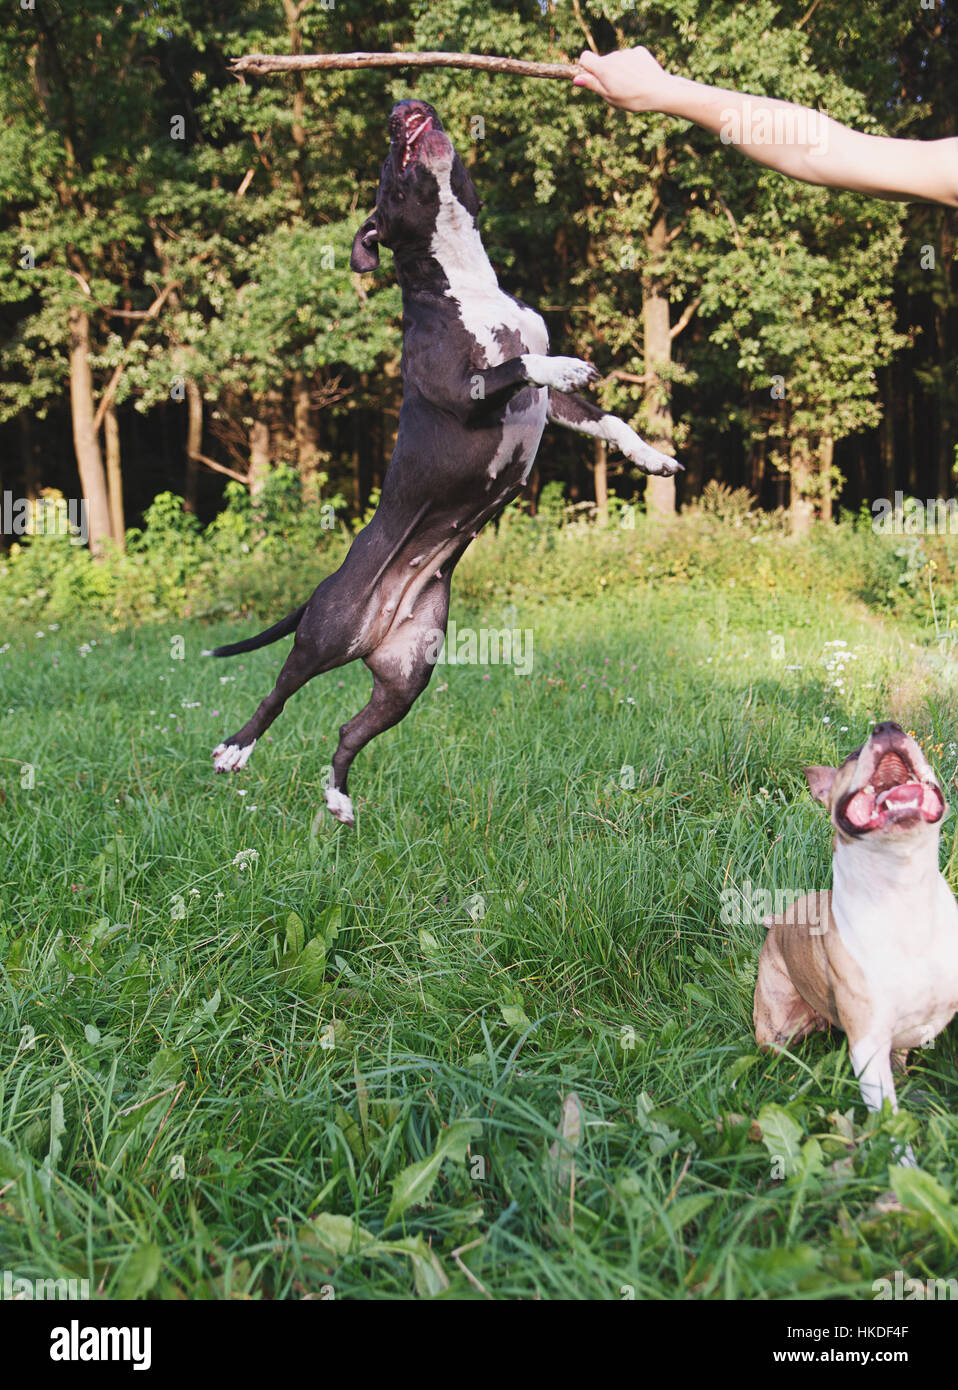 Dogs jumping to get piece of wood from human hand Stock Photo